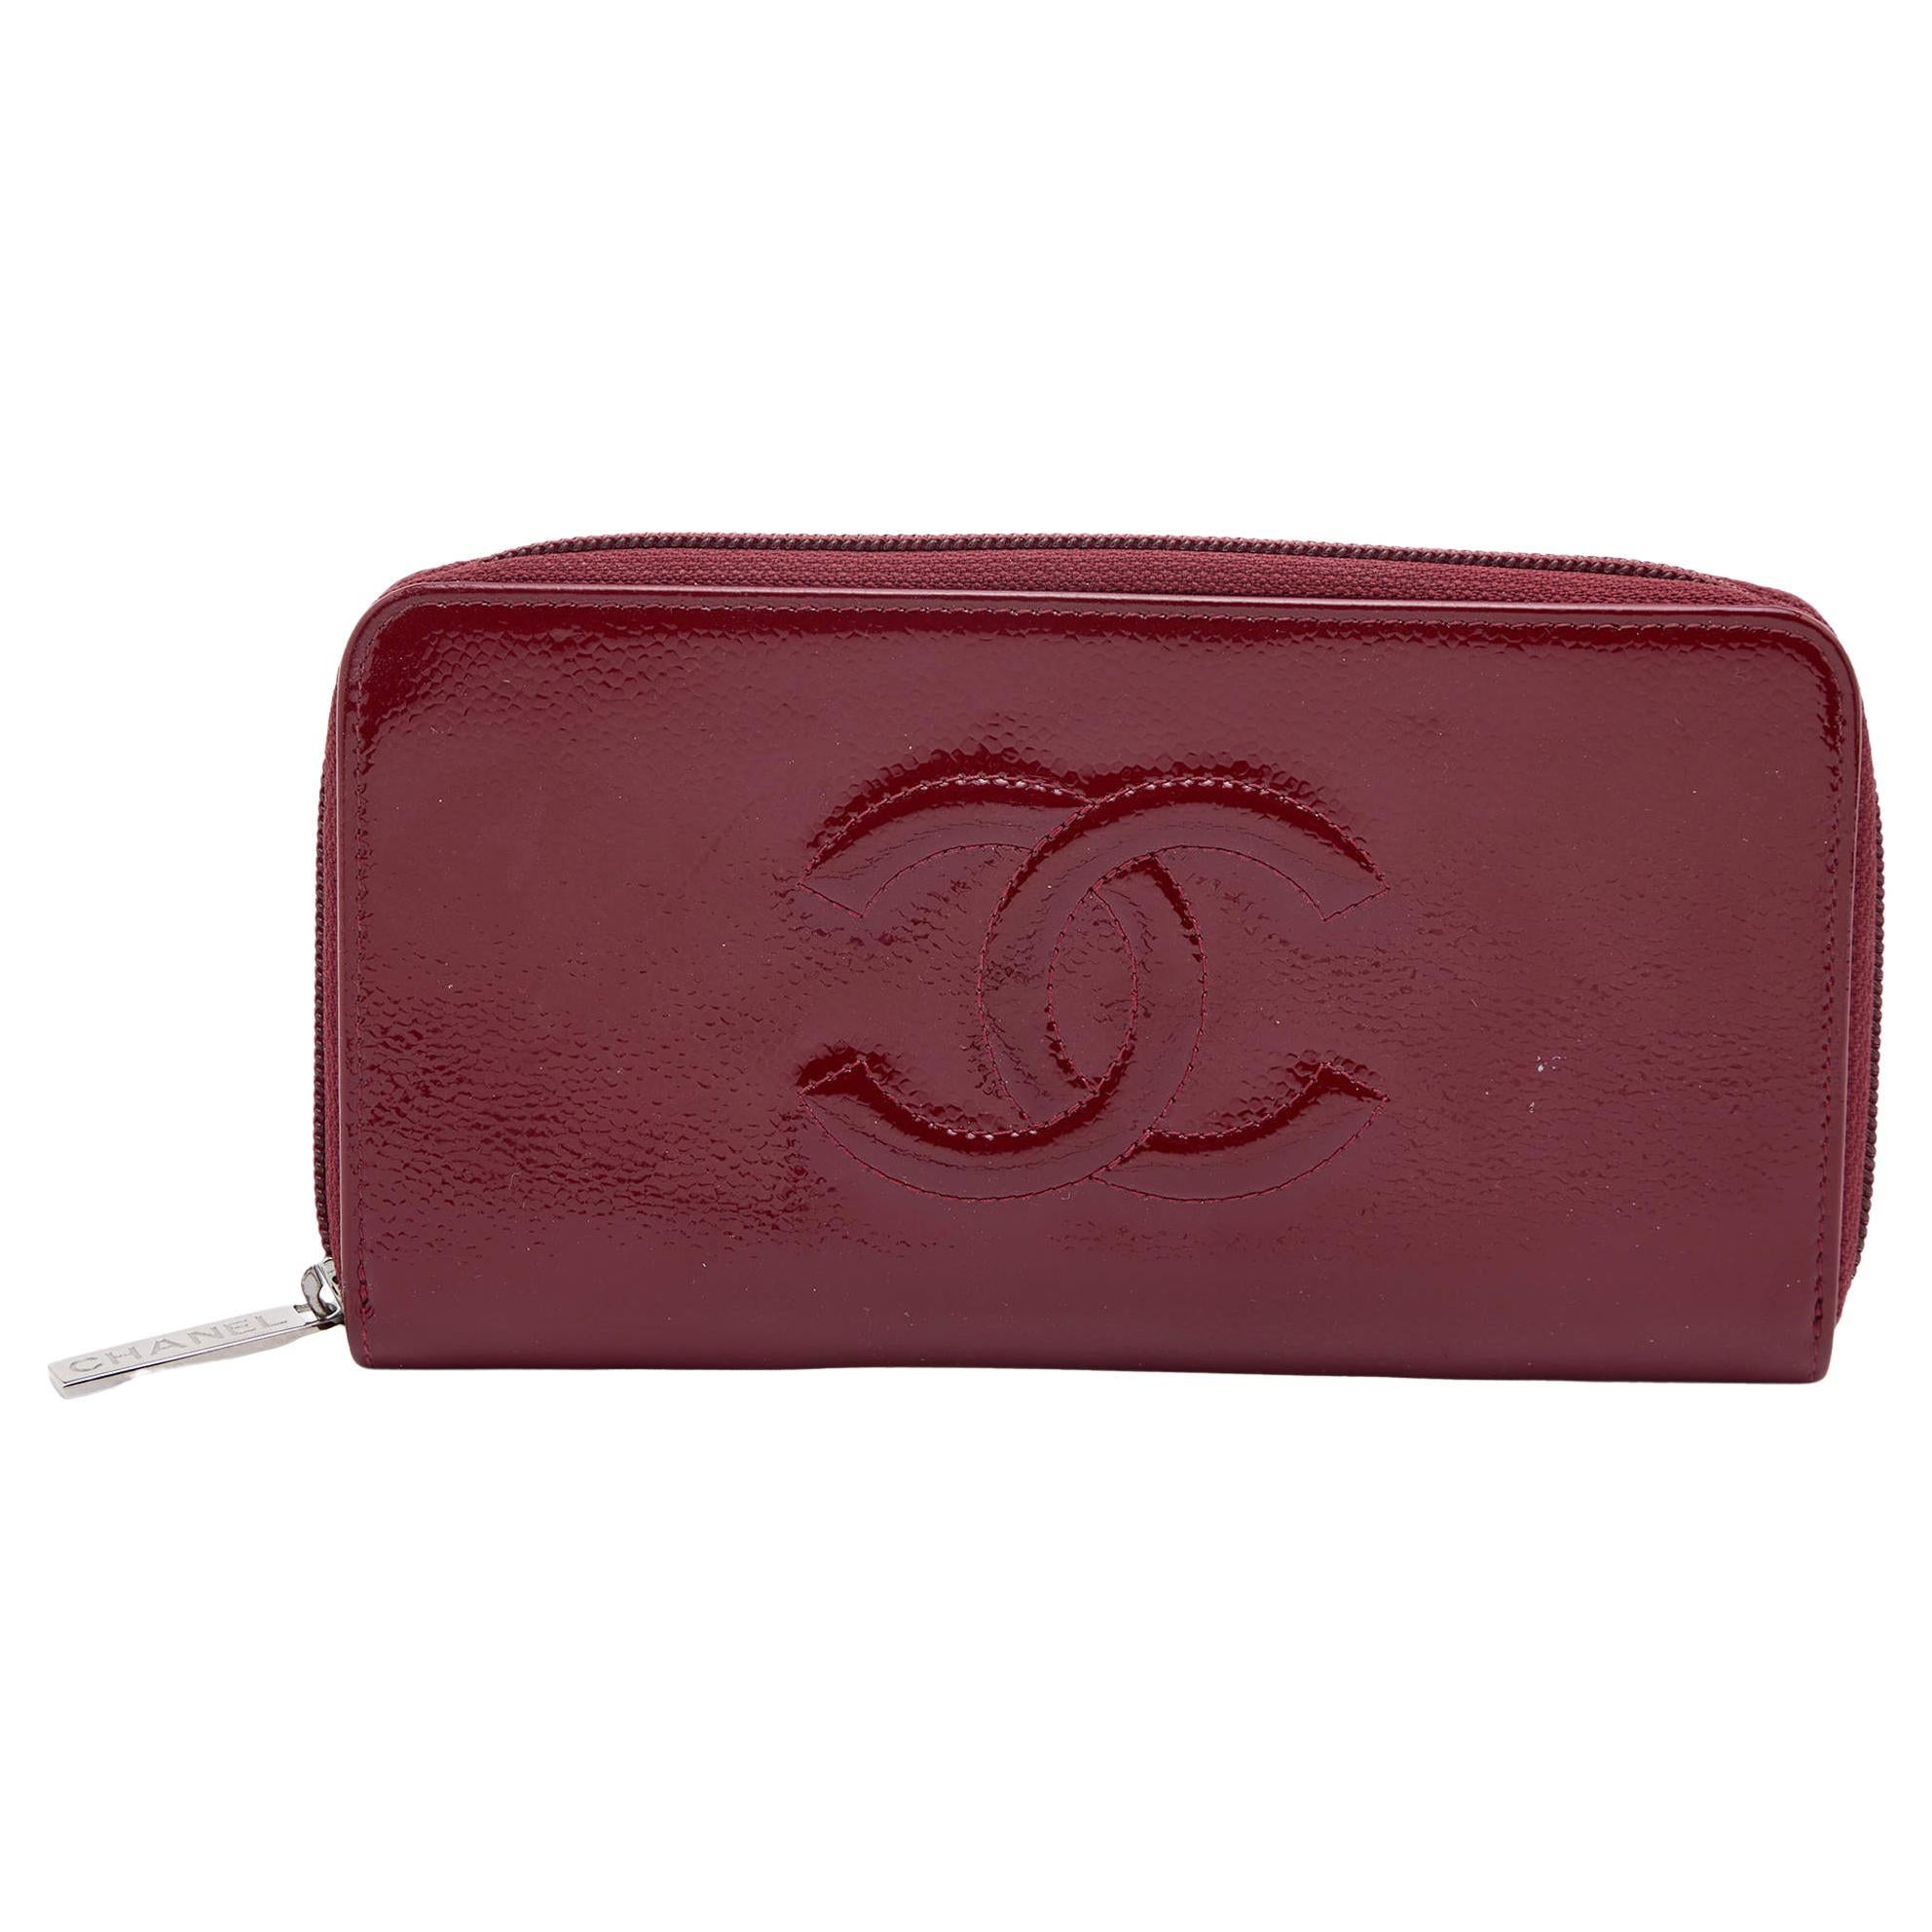 Chanel Dark Red Patent Leather CC Timeless Zip Around Wallet at